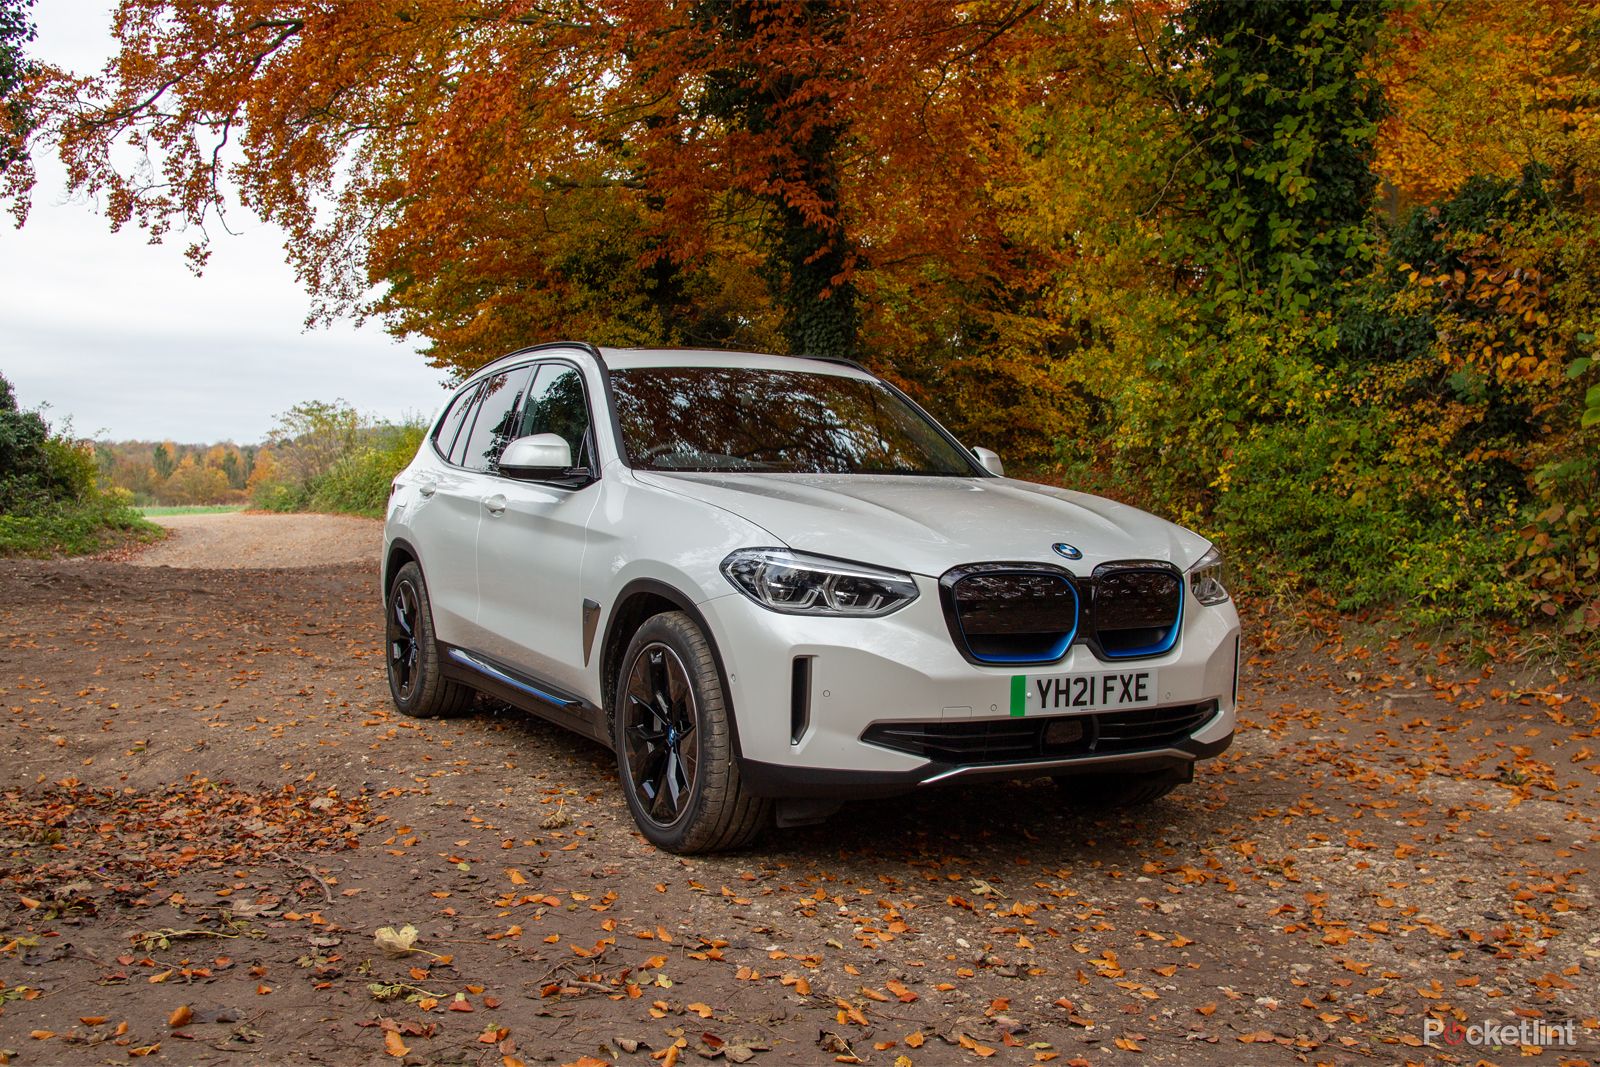 BMW iX3 review: Is an electric X3 worth buying?